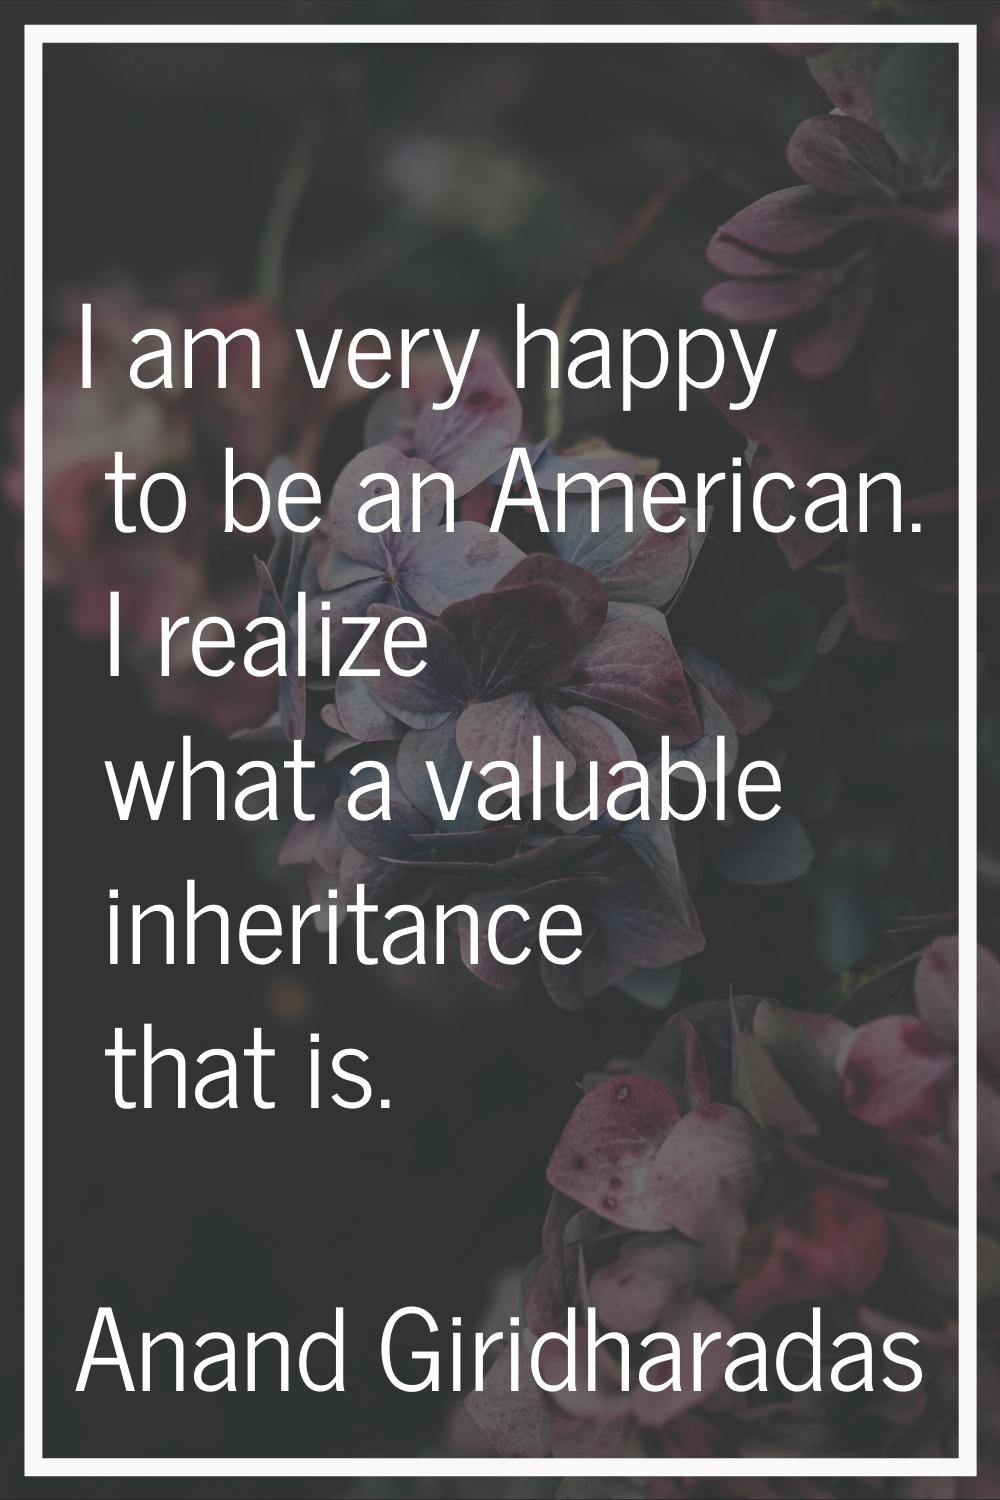 I am very happy to be an American. I realize what a valuable inheritance that is.